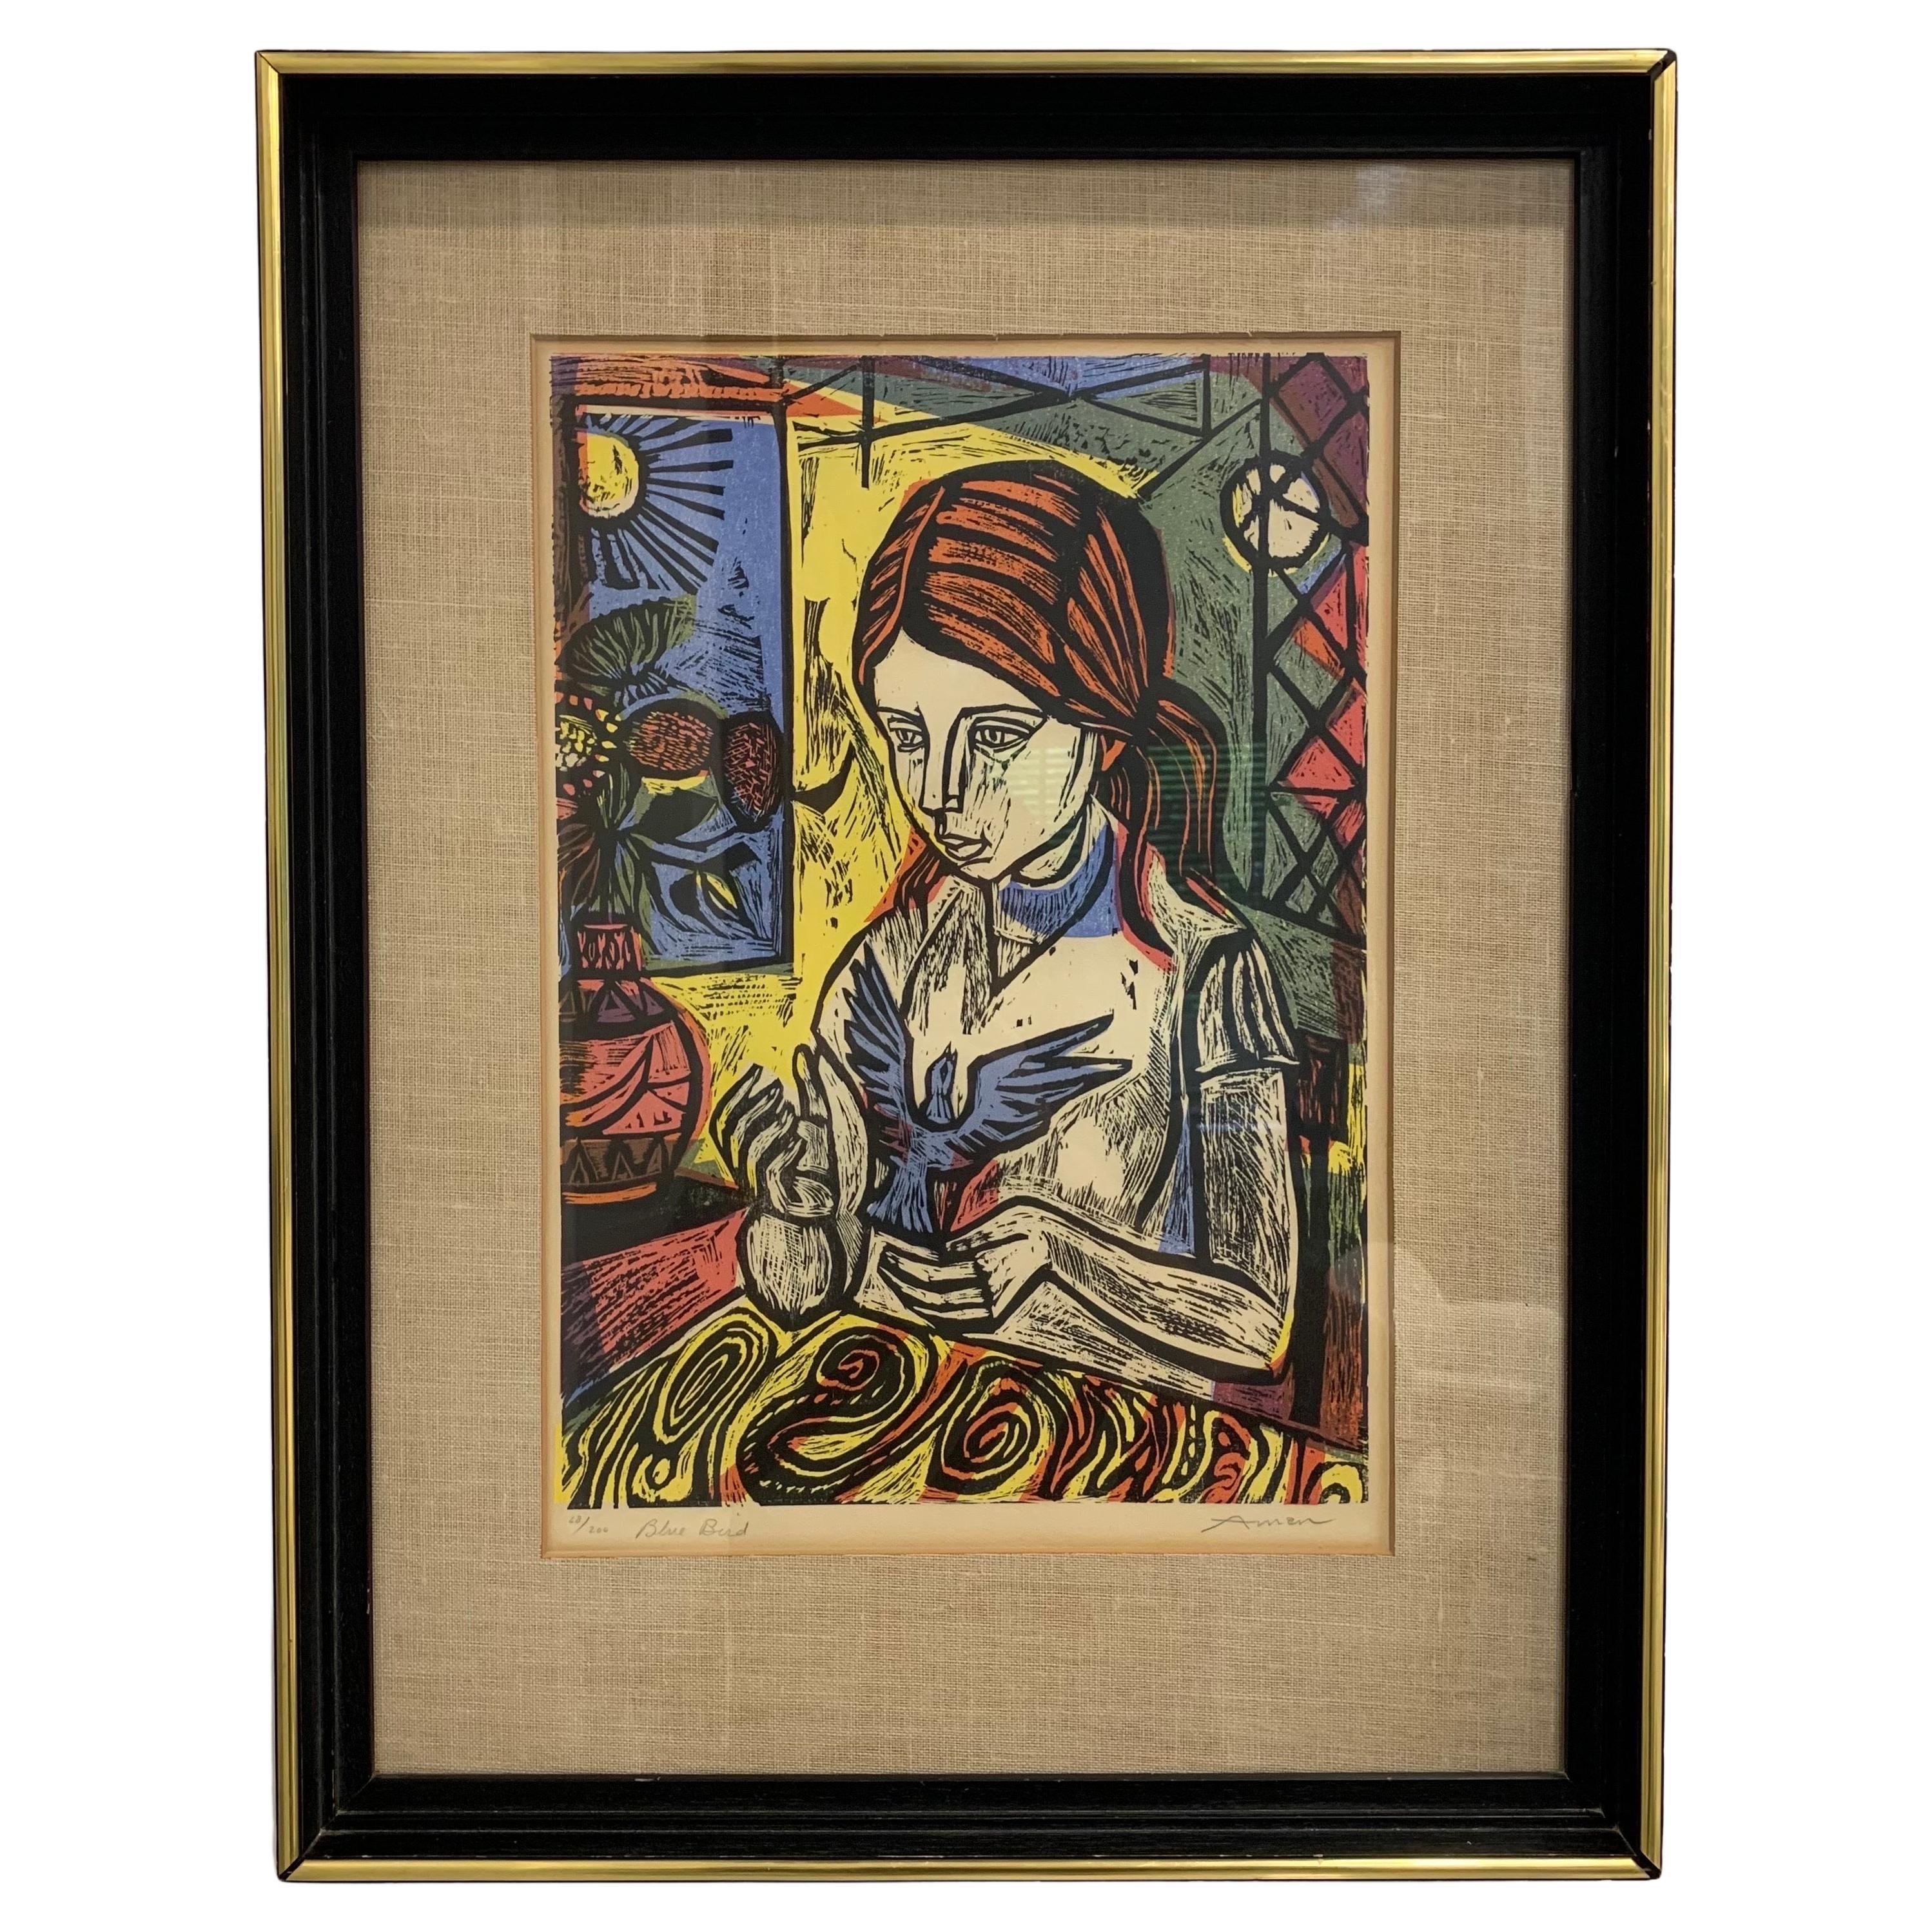 Irving Amen Signed Wood Cut Print Titled “Blue Bird” no. 68/200 For Sale